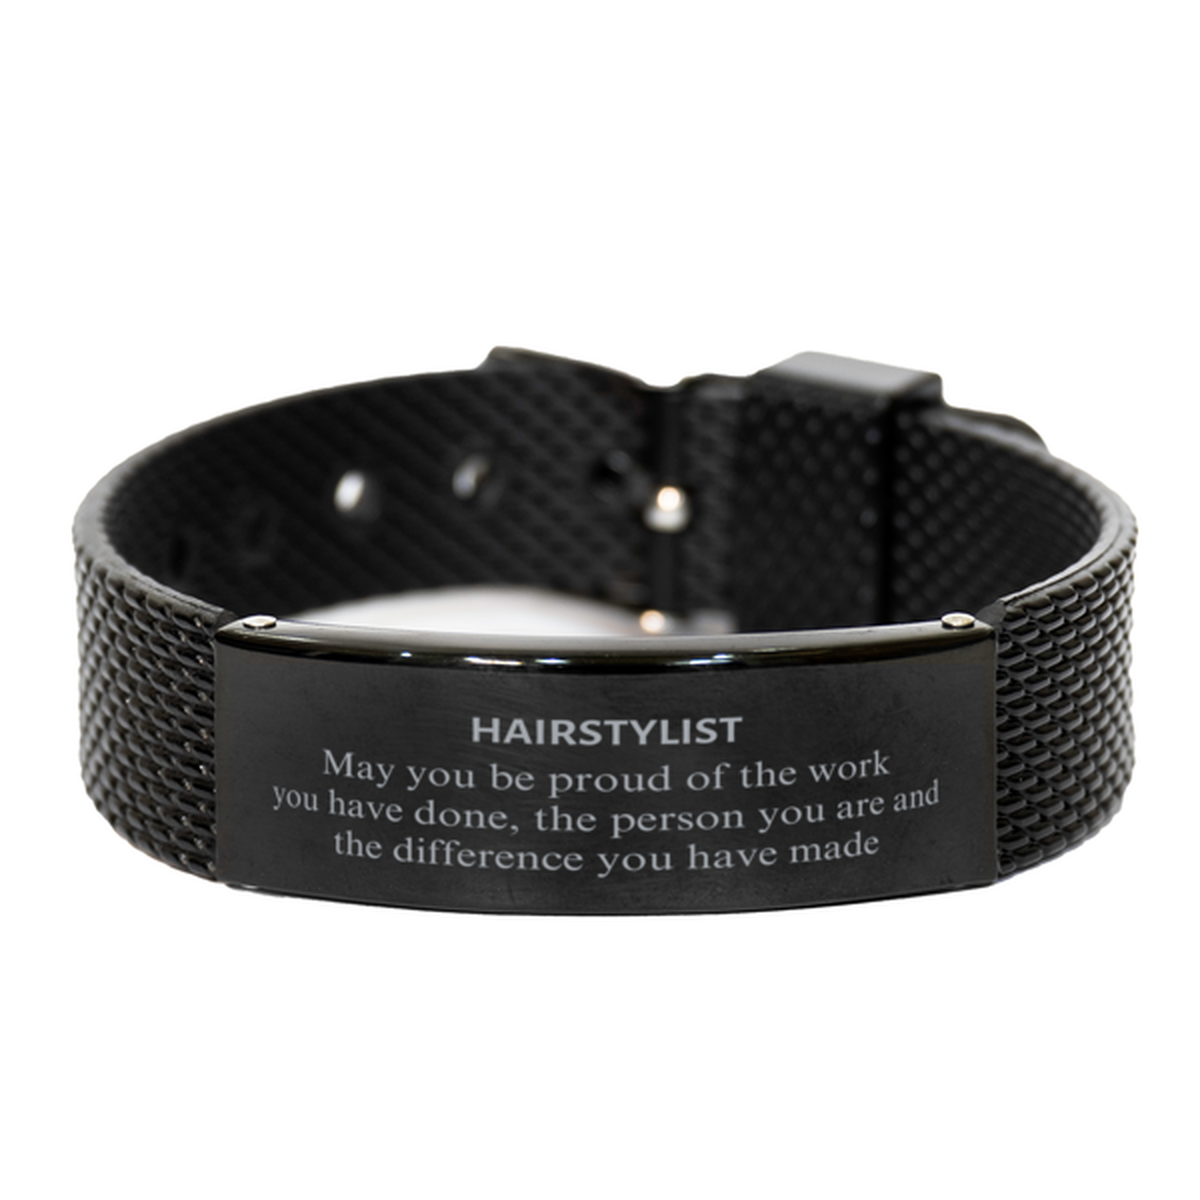 Hairstylist May you be proud of the work you have done, Retirement Hairstylist Black Shark Mesh Bracelet for Colleague Appreciation Gifts Amazing for Hairstylist